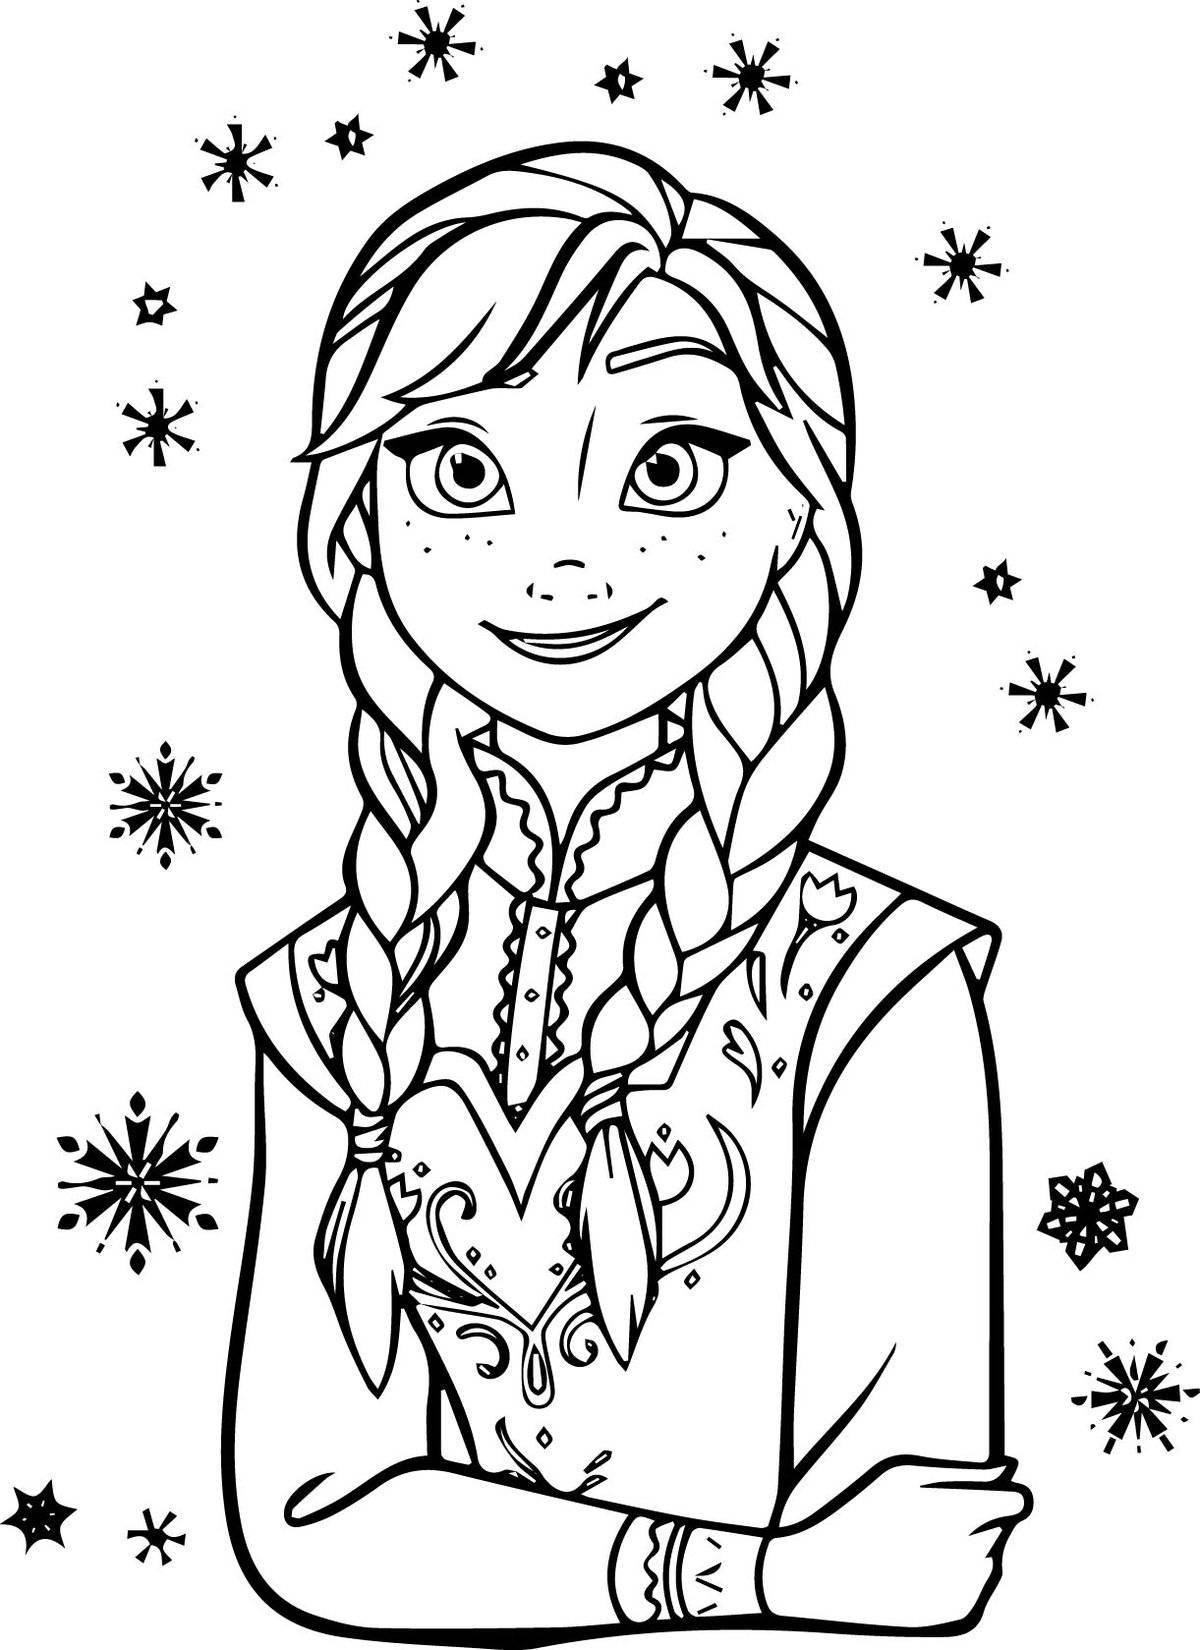 Deluxe coloring elsa and anna frozen 2